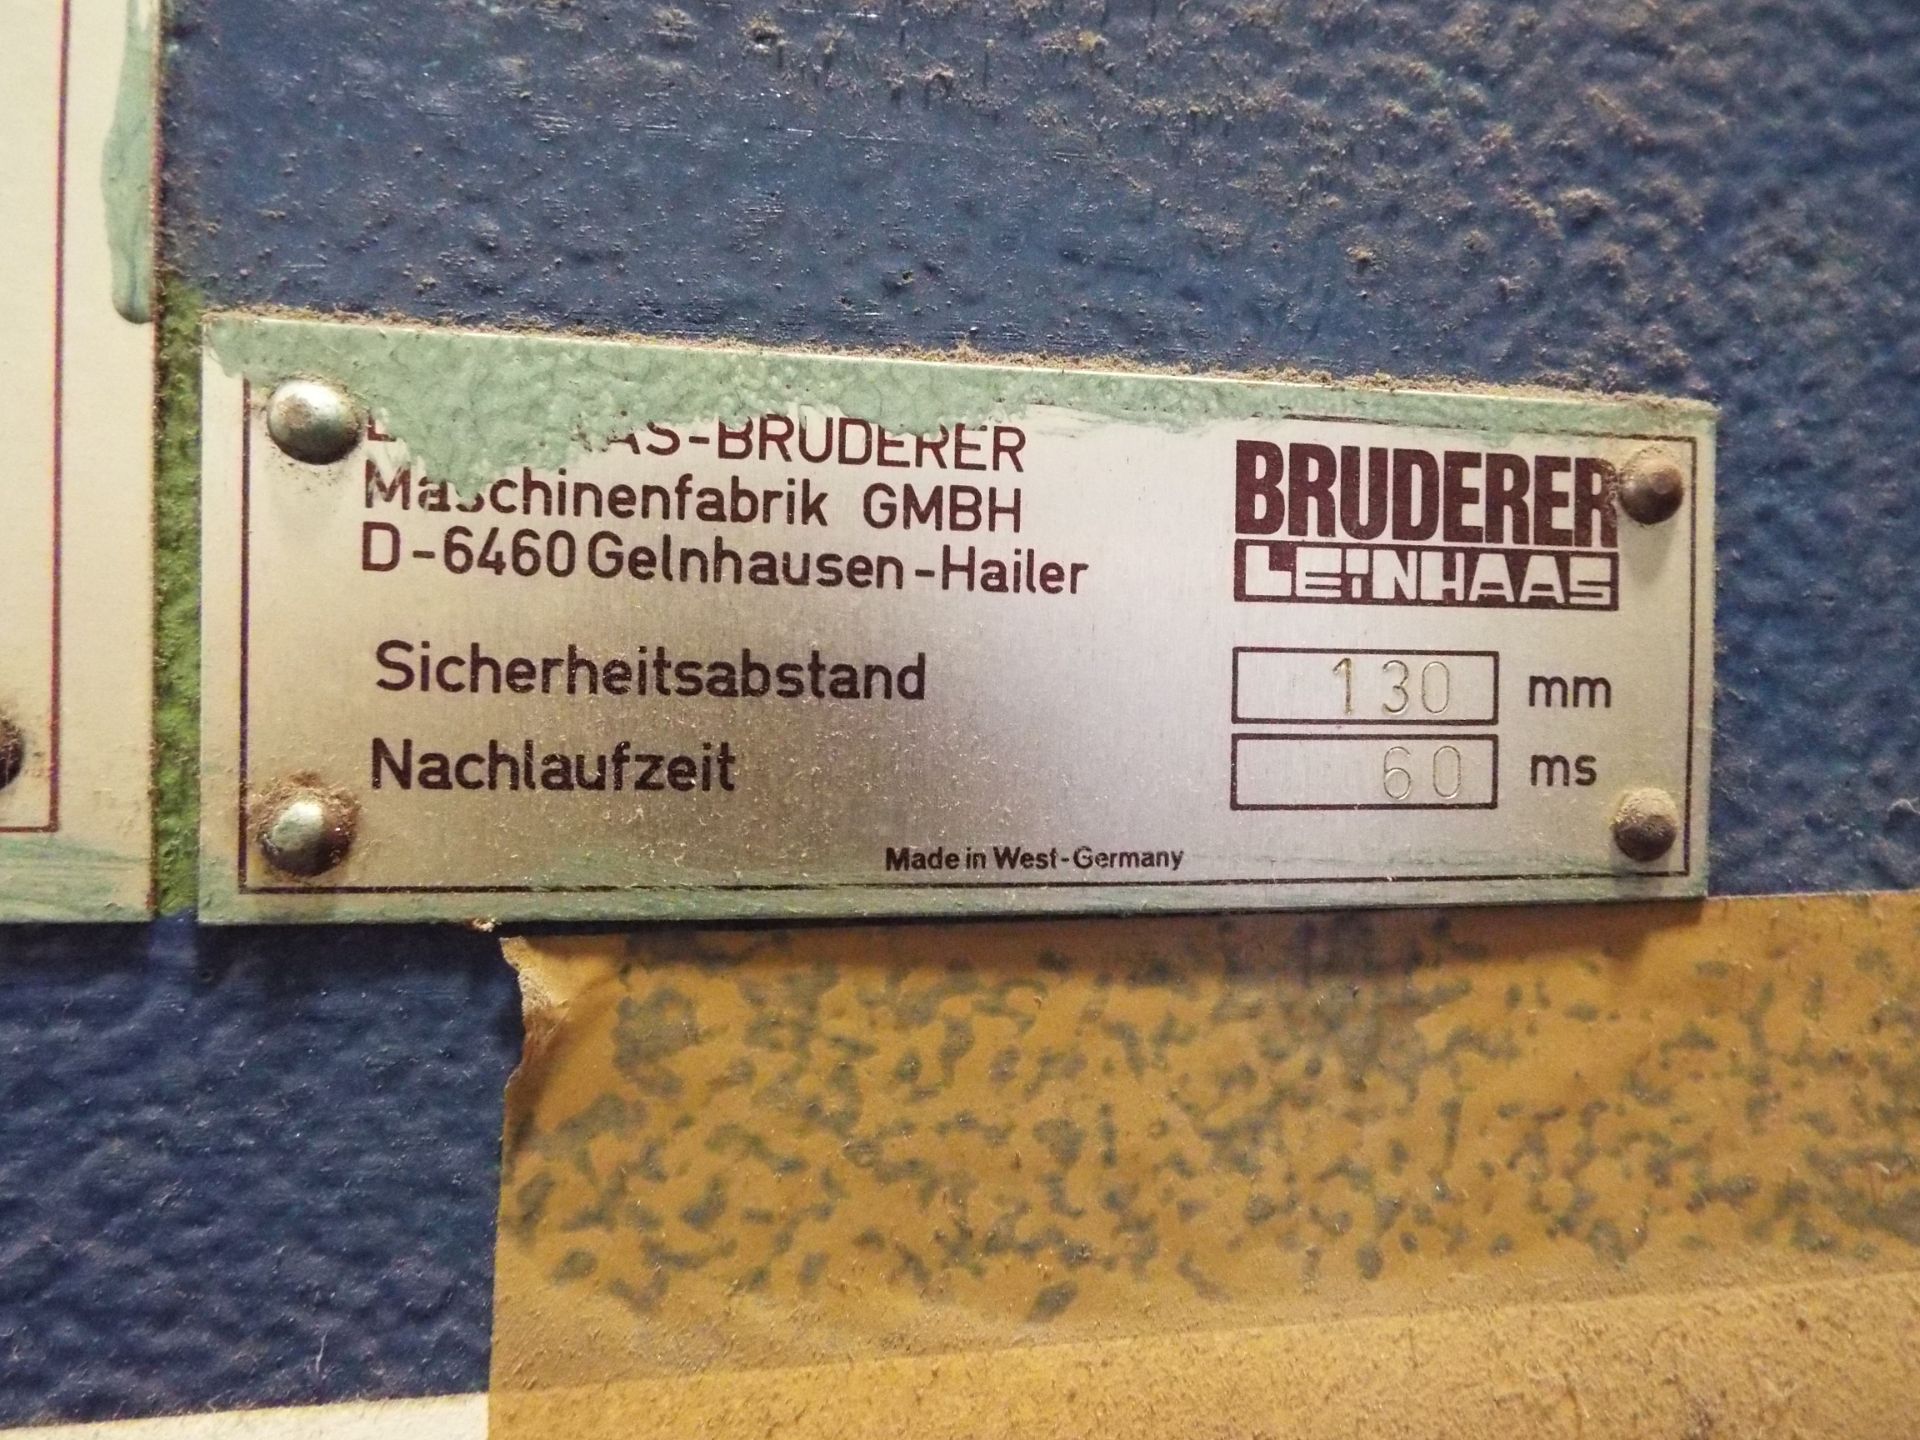 Bruderer Leinhaas DWP-R11-100-NS Single Column Differential High Speed Hydraulic Press. - Image 4 of 10